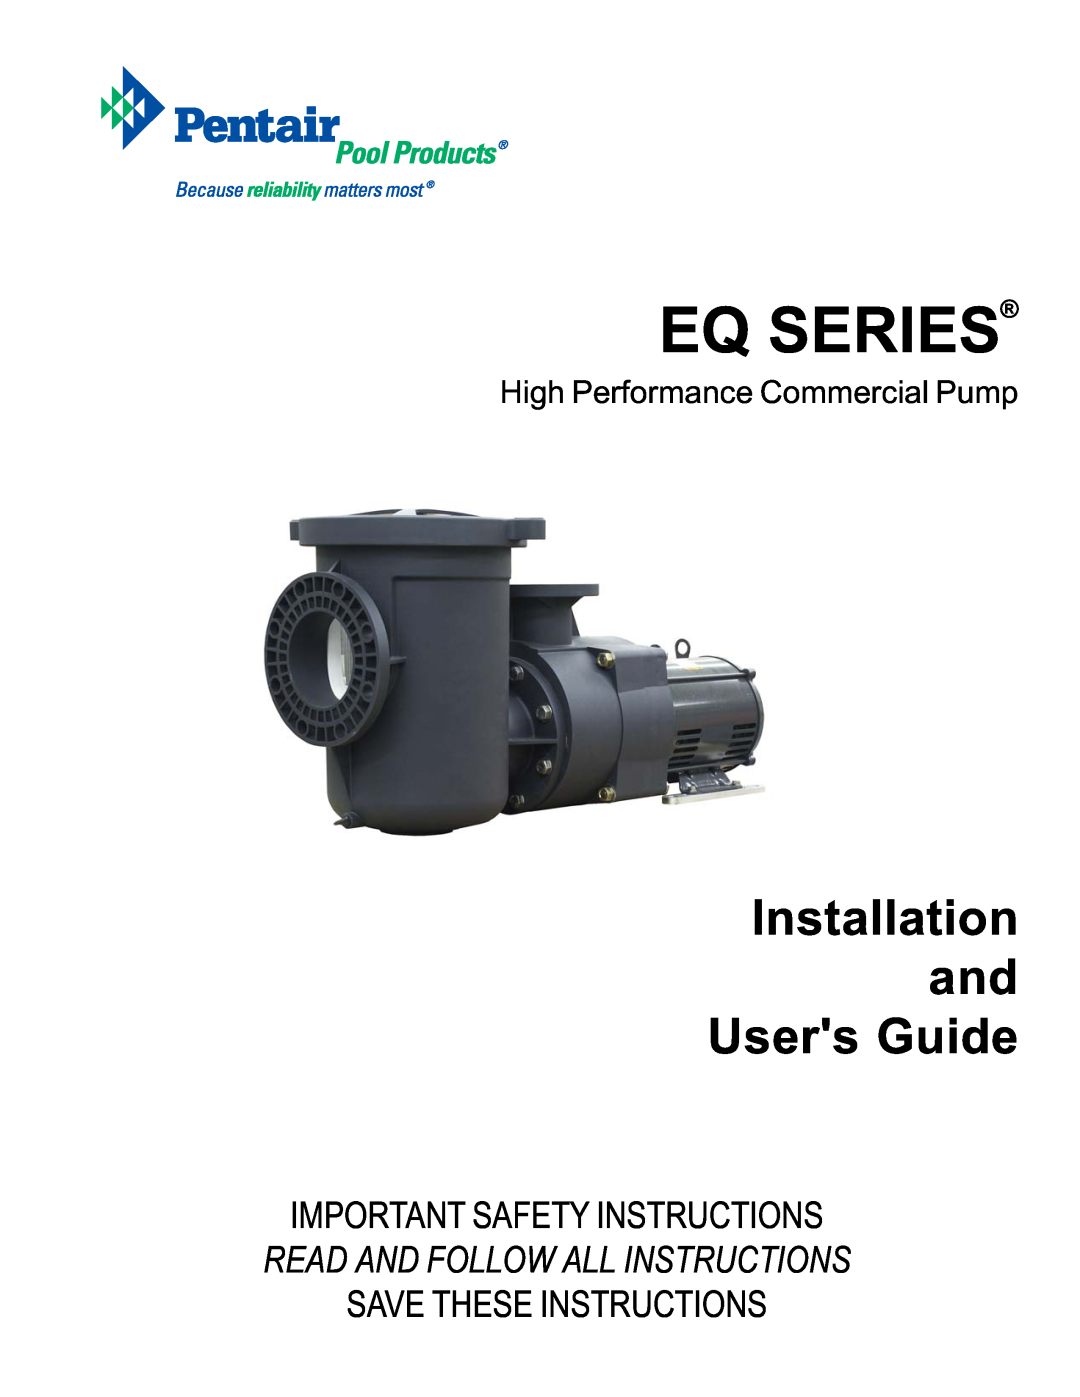 Pentair EQ SERIES important safety instructions High Performance Commercial Pump, Eq Series, Installation and Users Guide 